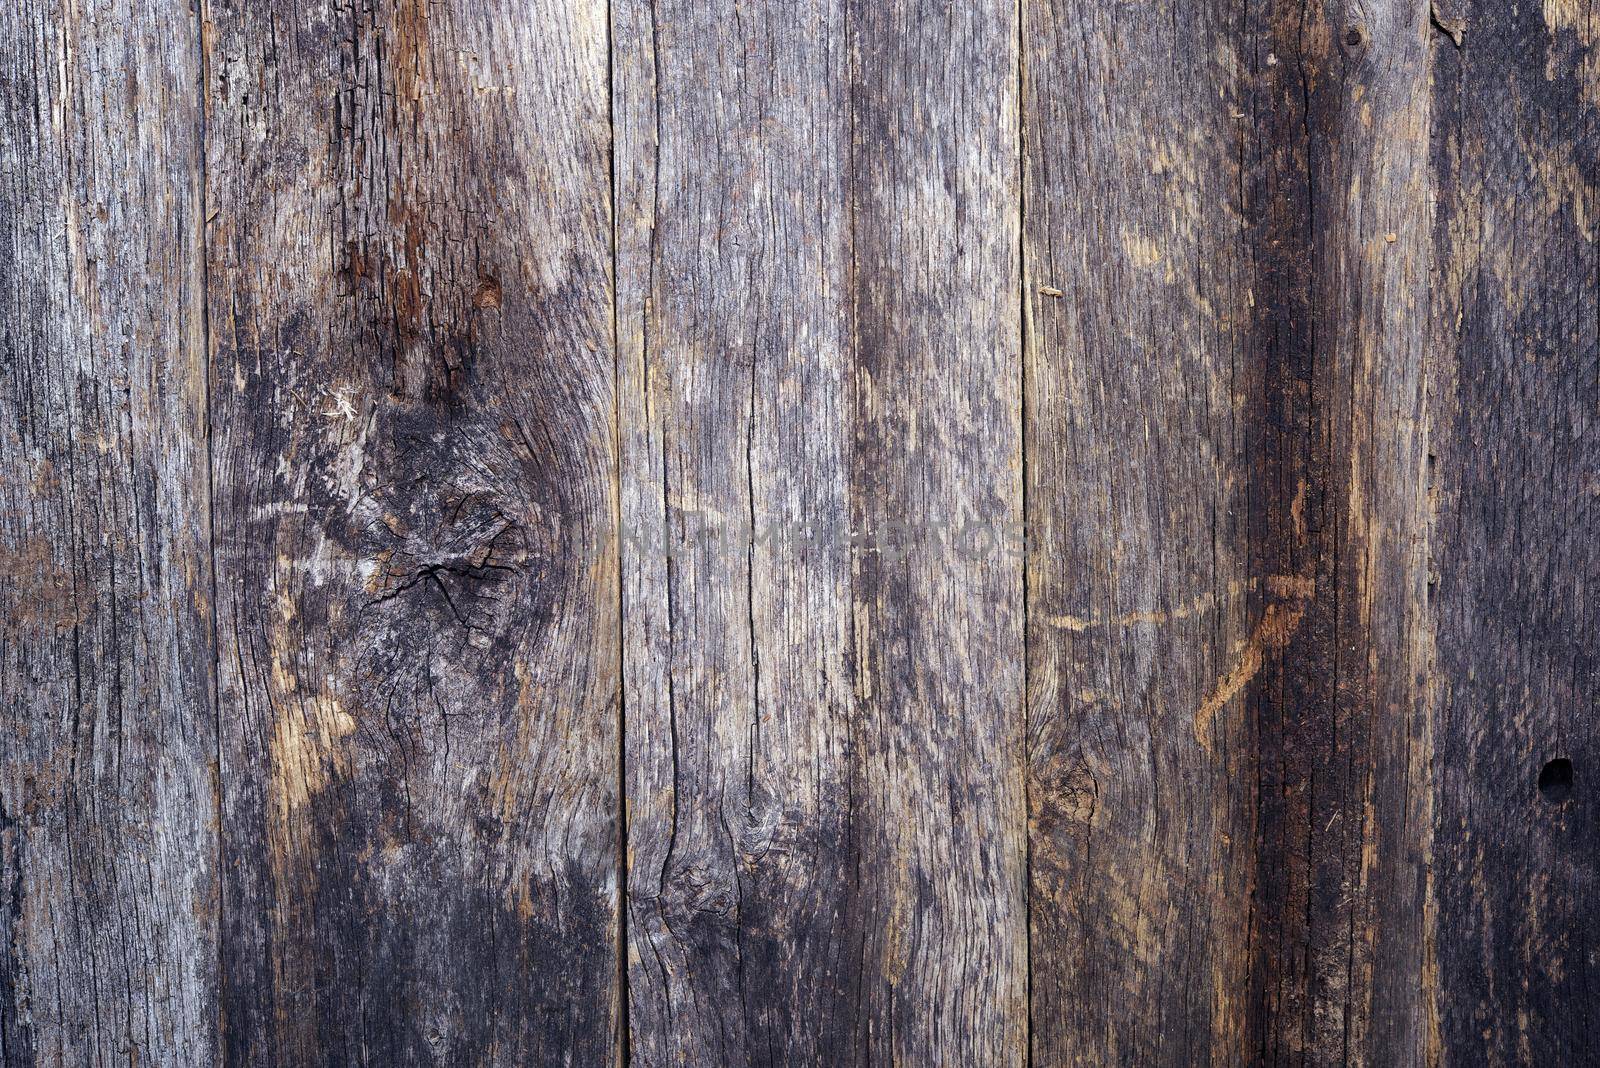 Aged Reclaimed Wood Background. Vertical Aged Planks.